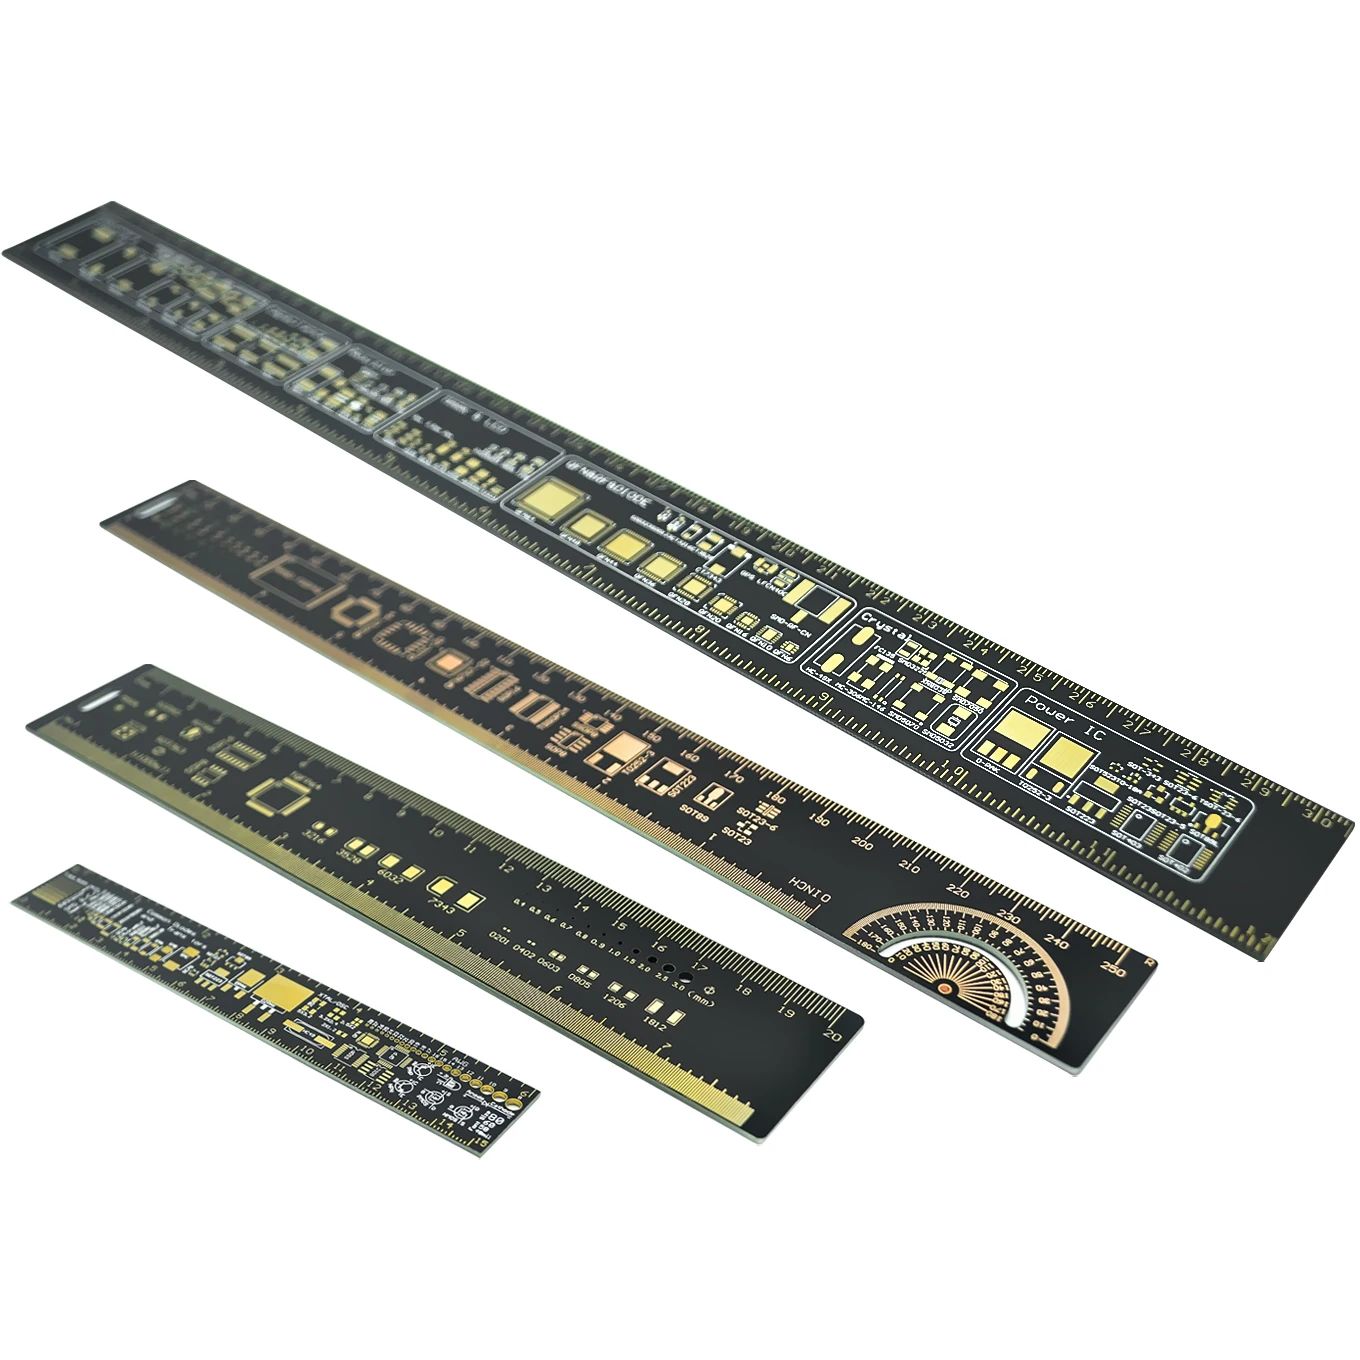 

15cm 20cm 25cm 30cm Multifunctional PCB Ruler Measuring Tool Resistor Capacitor Chip IC SMD Diode Transistor Package 180 Degrees